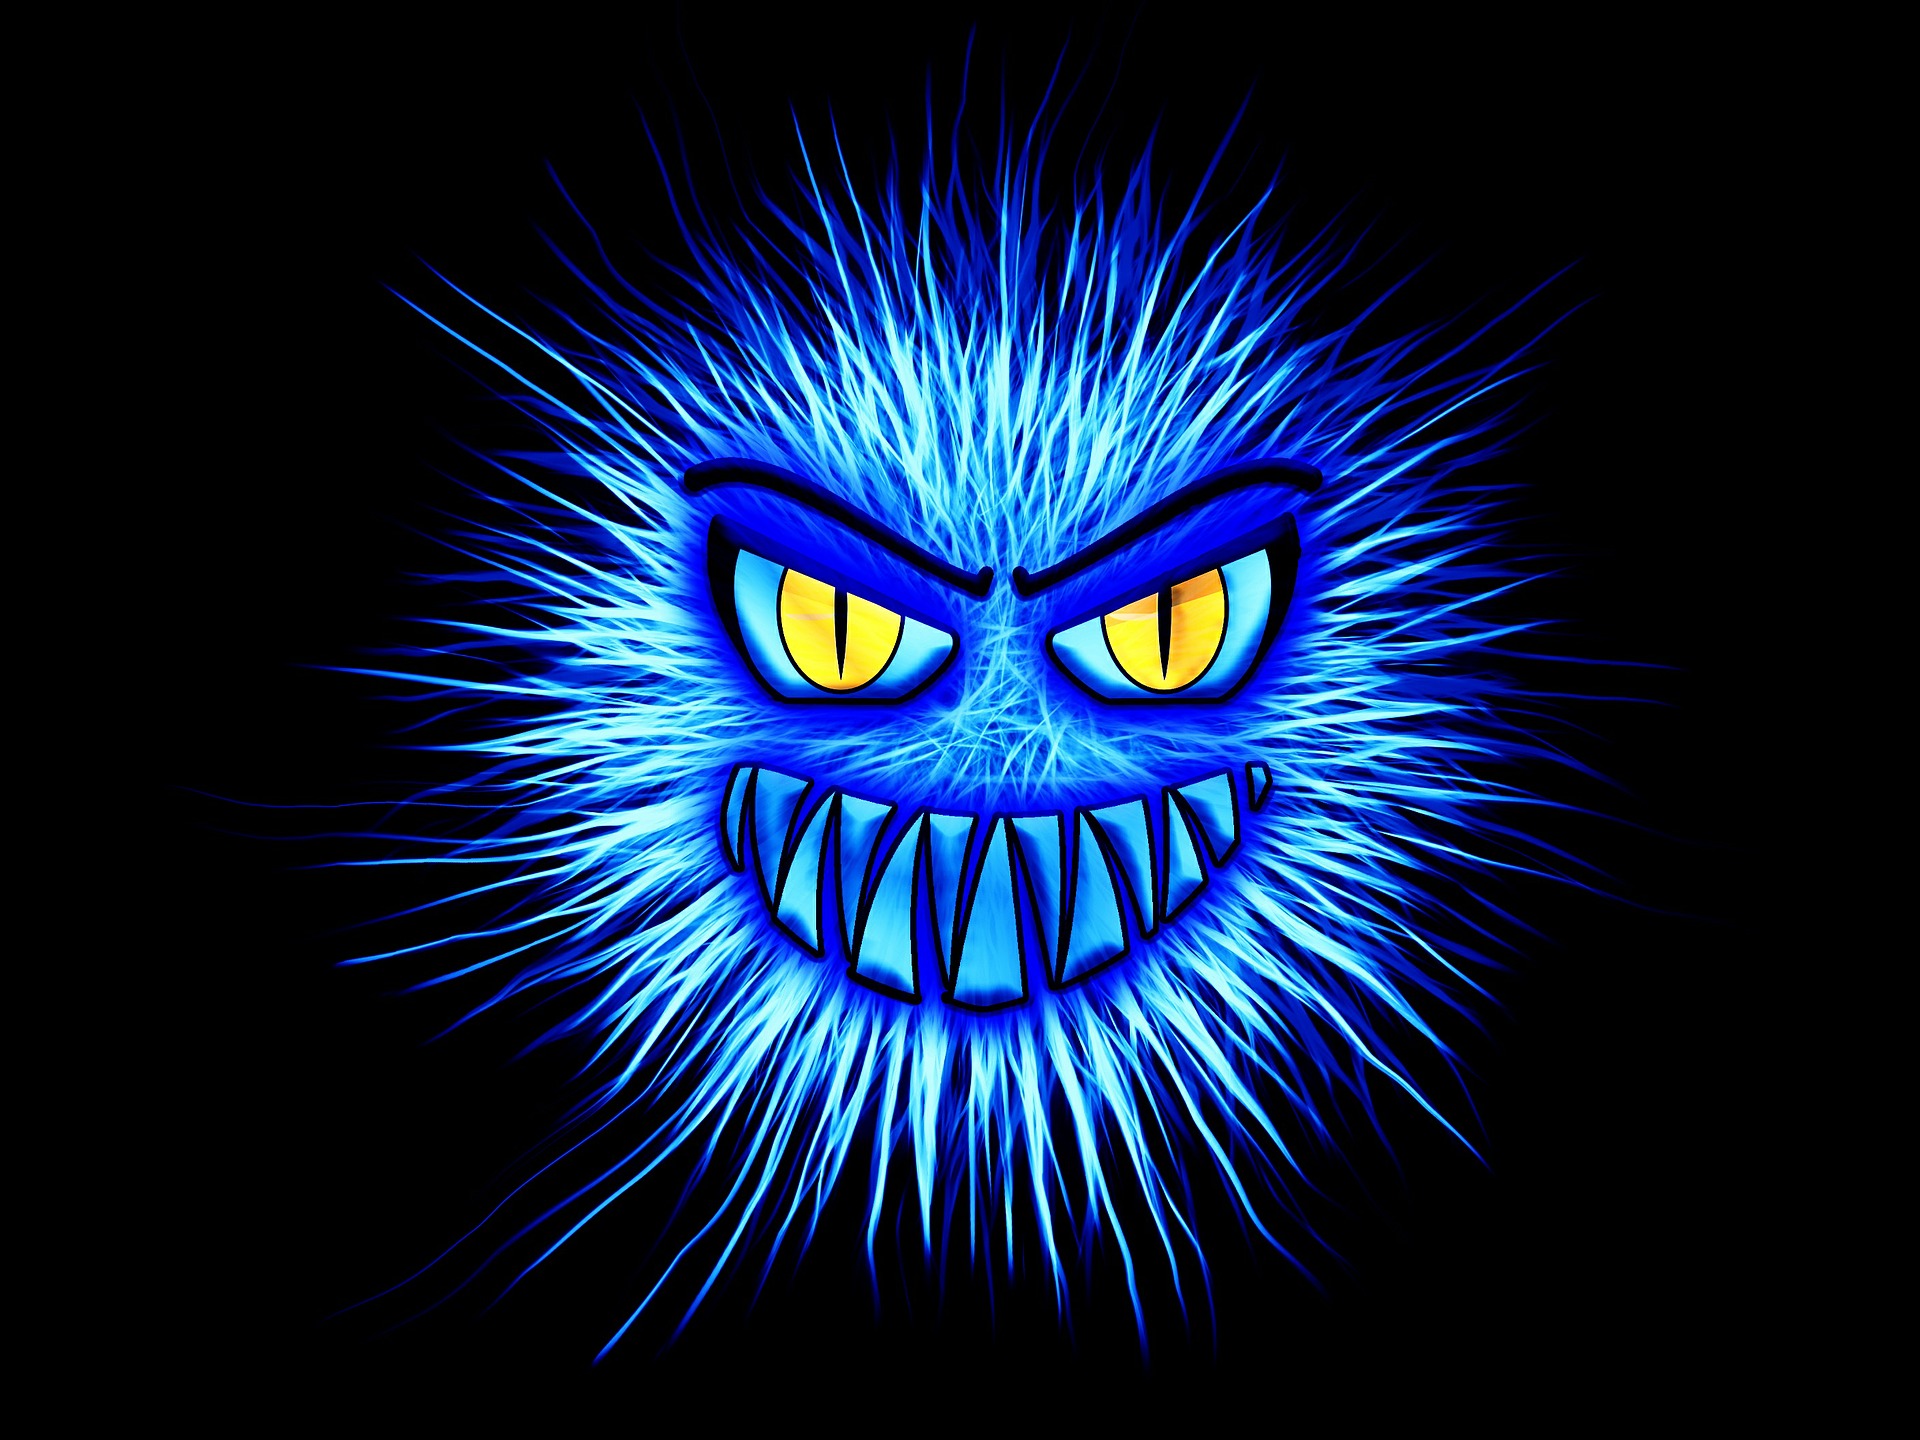 Caricature of a computer virus. It is blue and spiky and has yellow eyes with a grimace